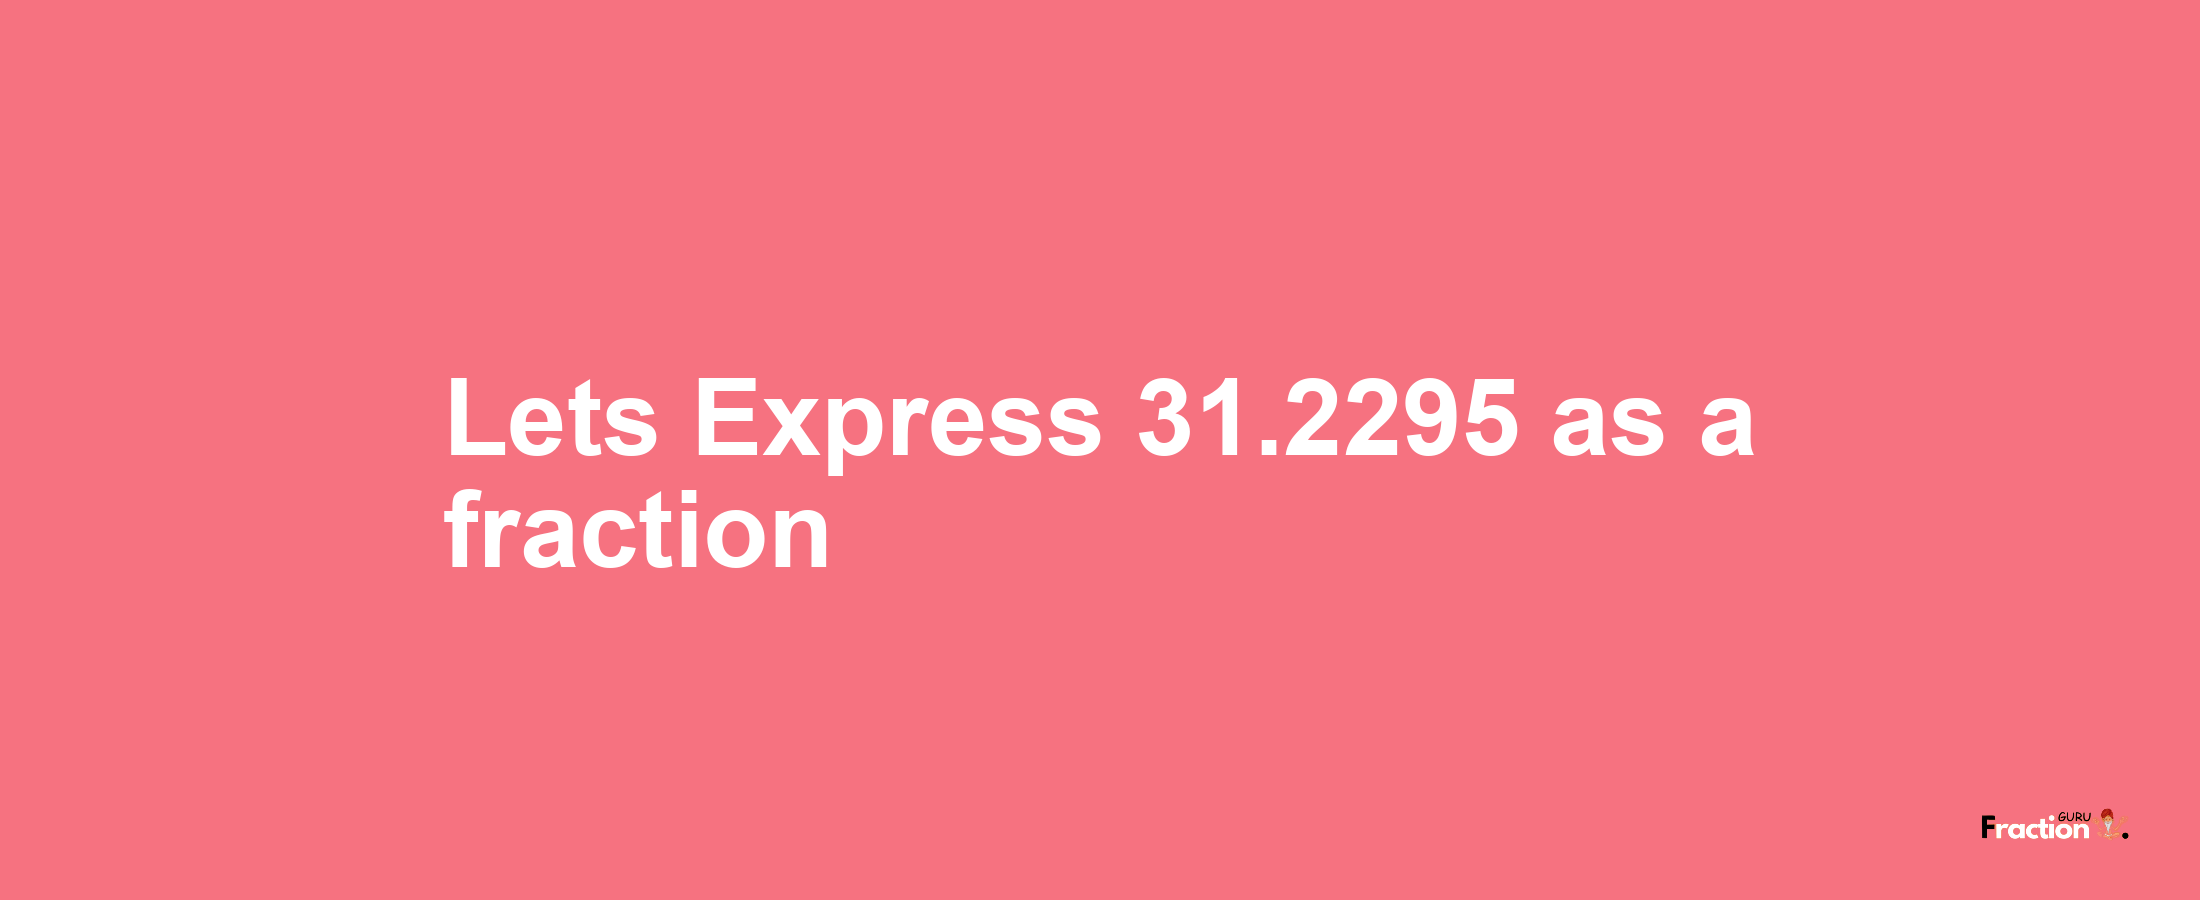 Lets Express 31.2295 as afraction